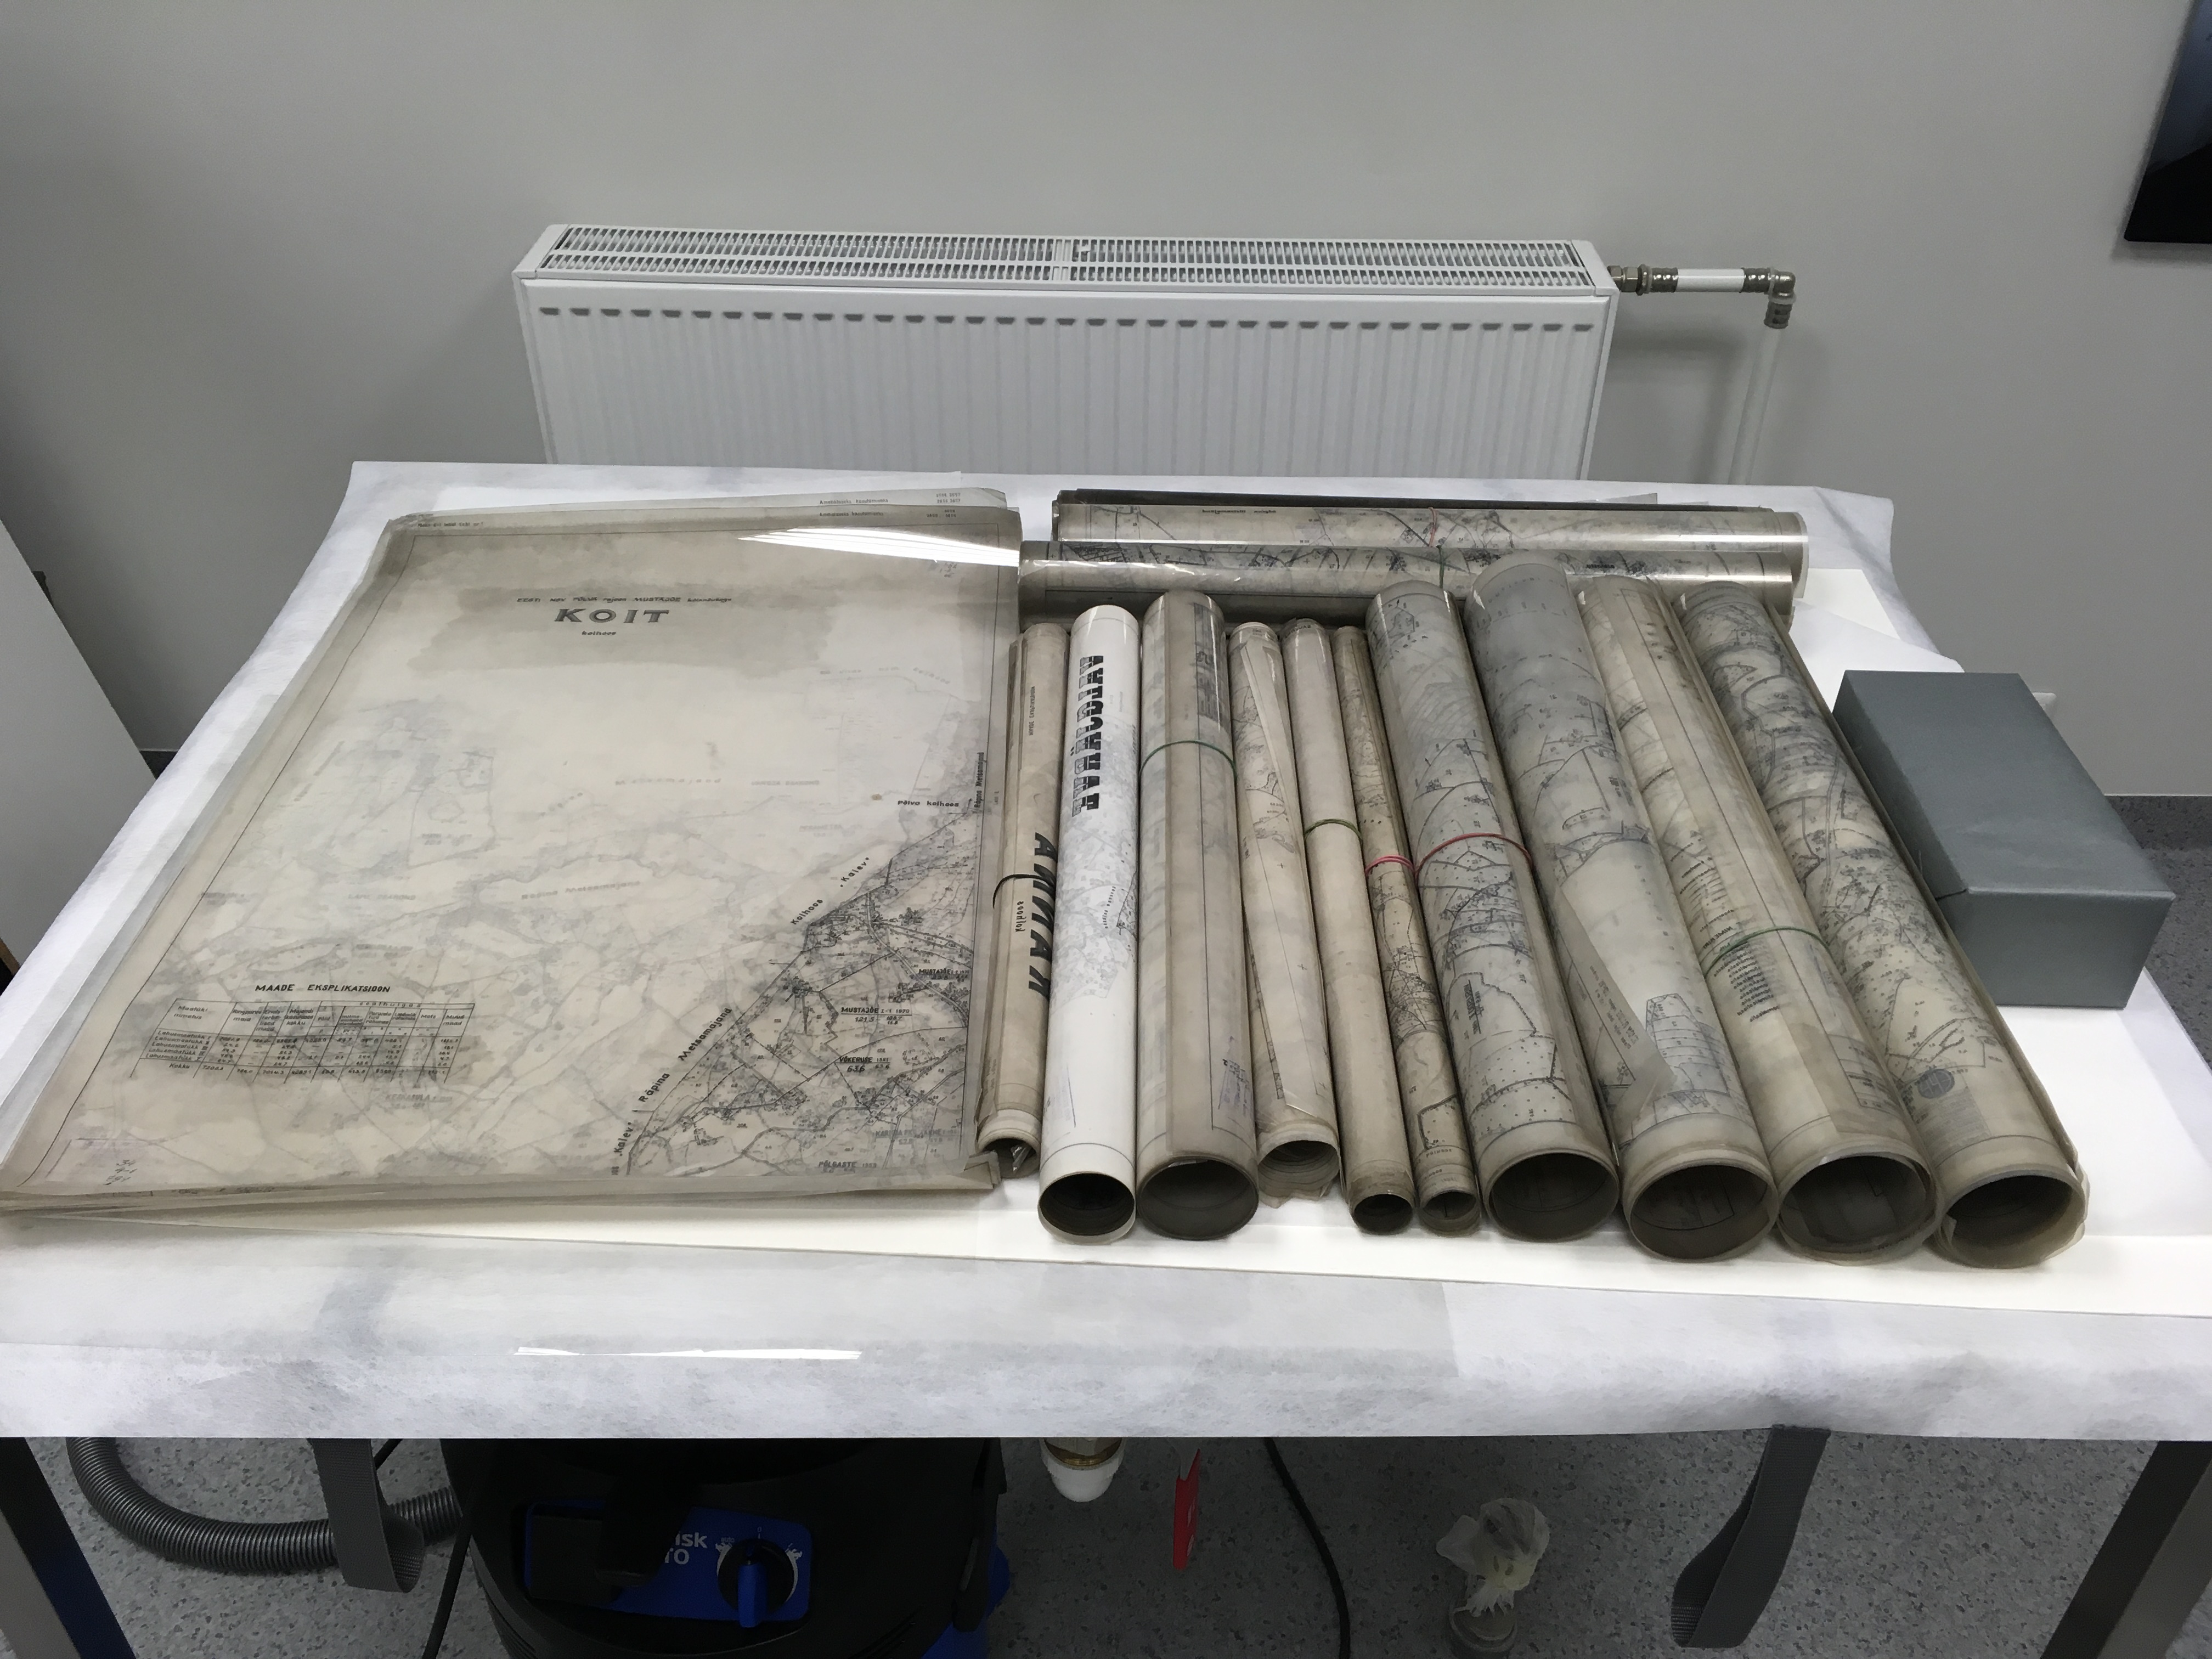 Plans and maps stored in rolled position. Image 2a